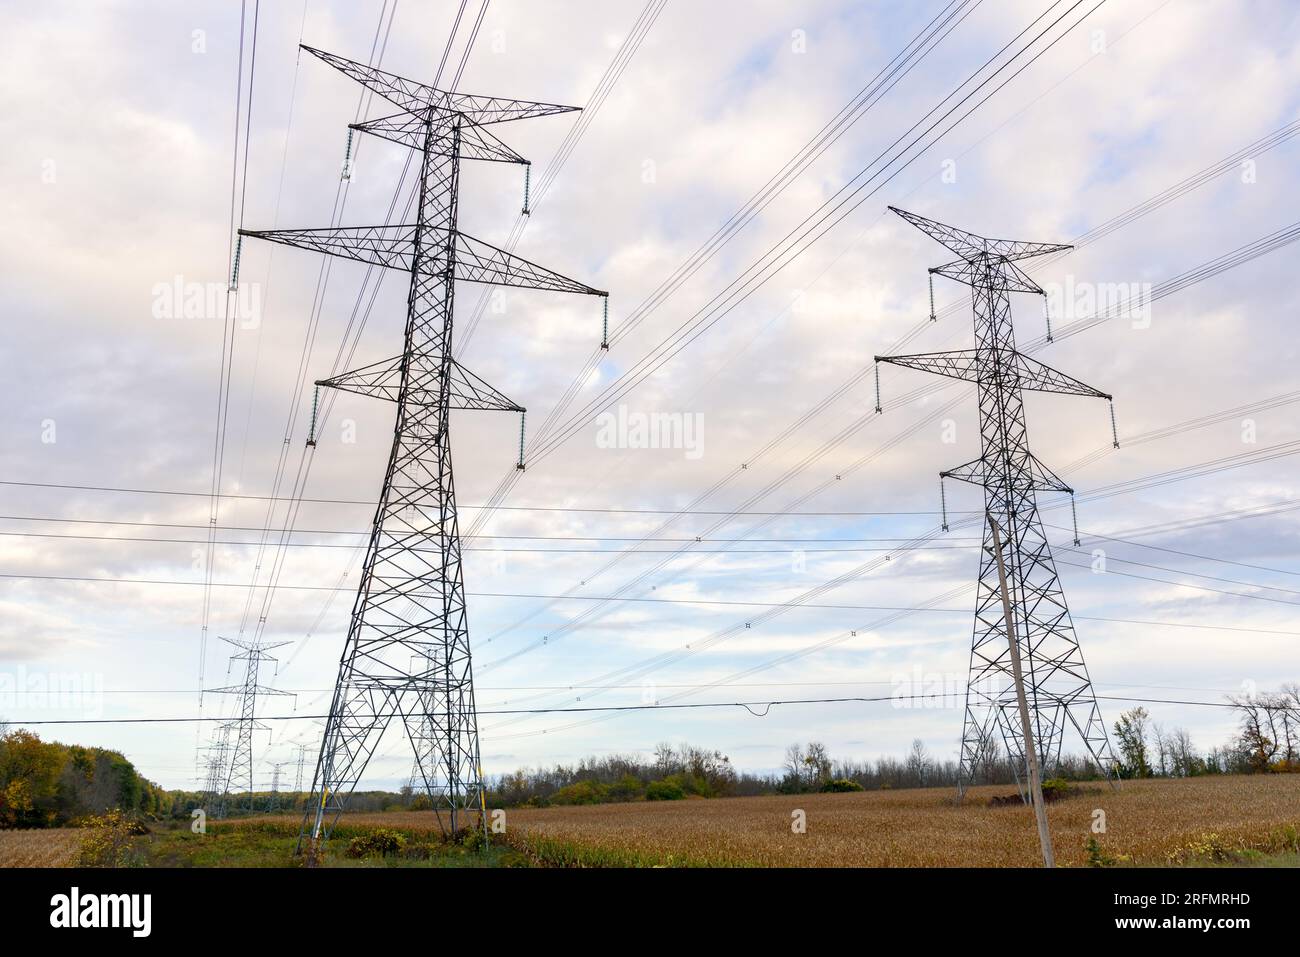 Tall pylons supporting high voltage lines over farmland on a cloudy autumn day Stock Photo